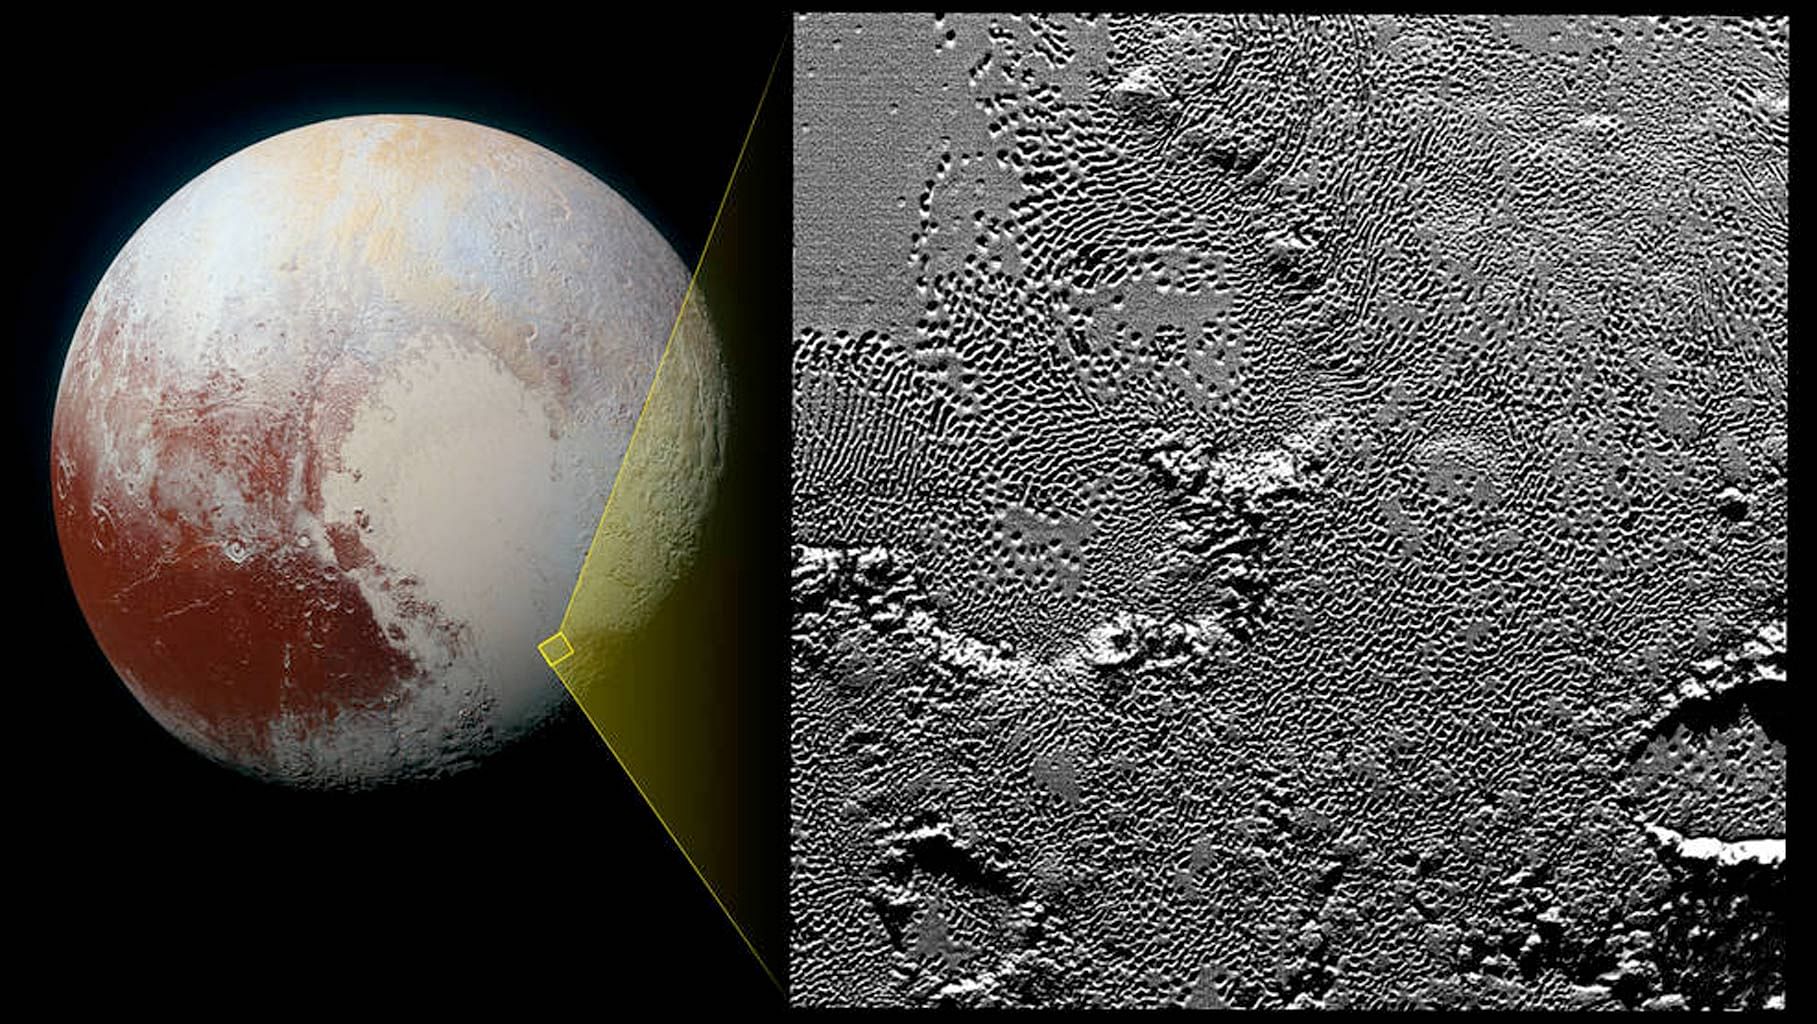 Intricate pattern of “pits” across Tombaugh Region of Pluto’s prominent heart-shaped region, informally named. (Photo: NASA)